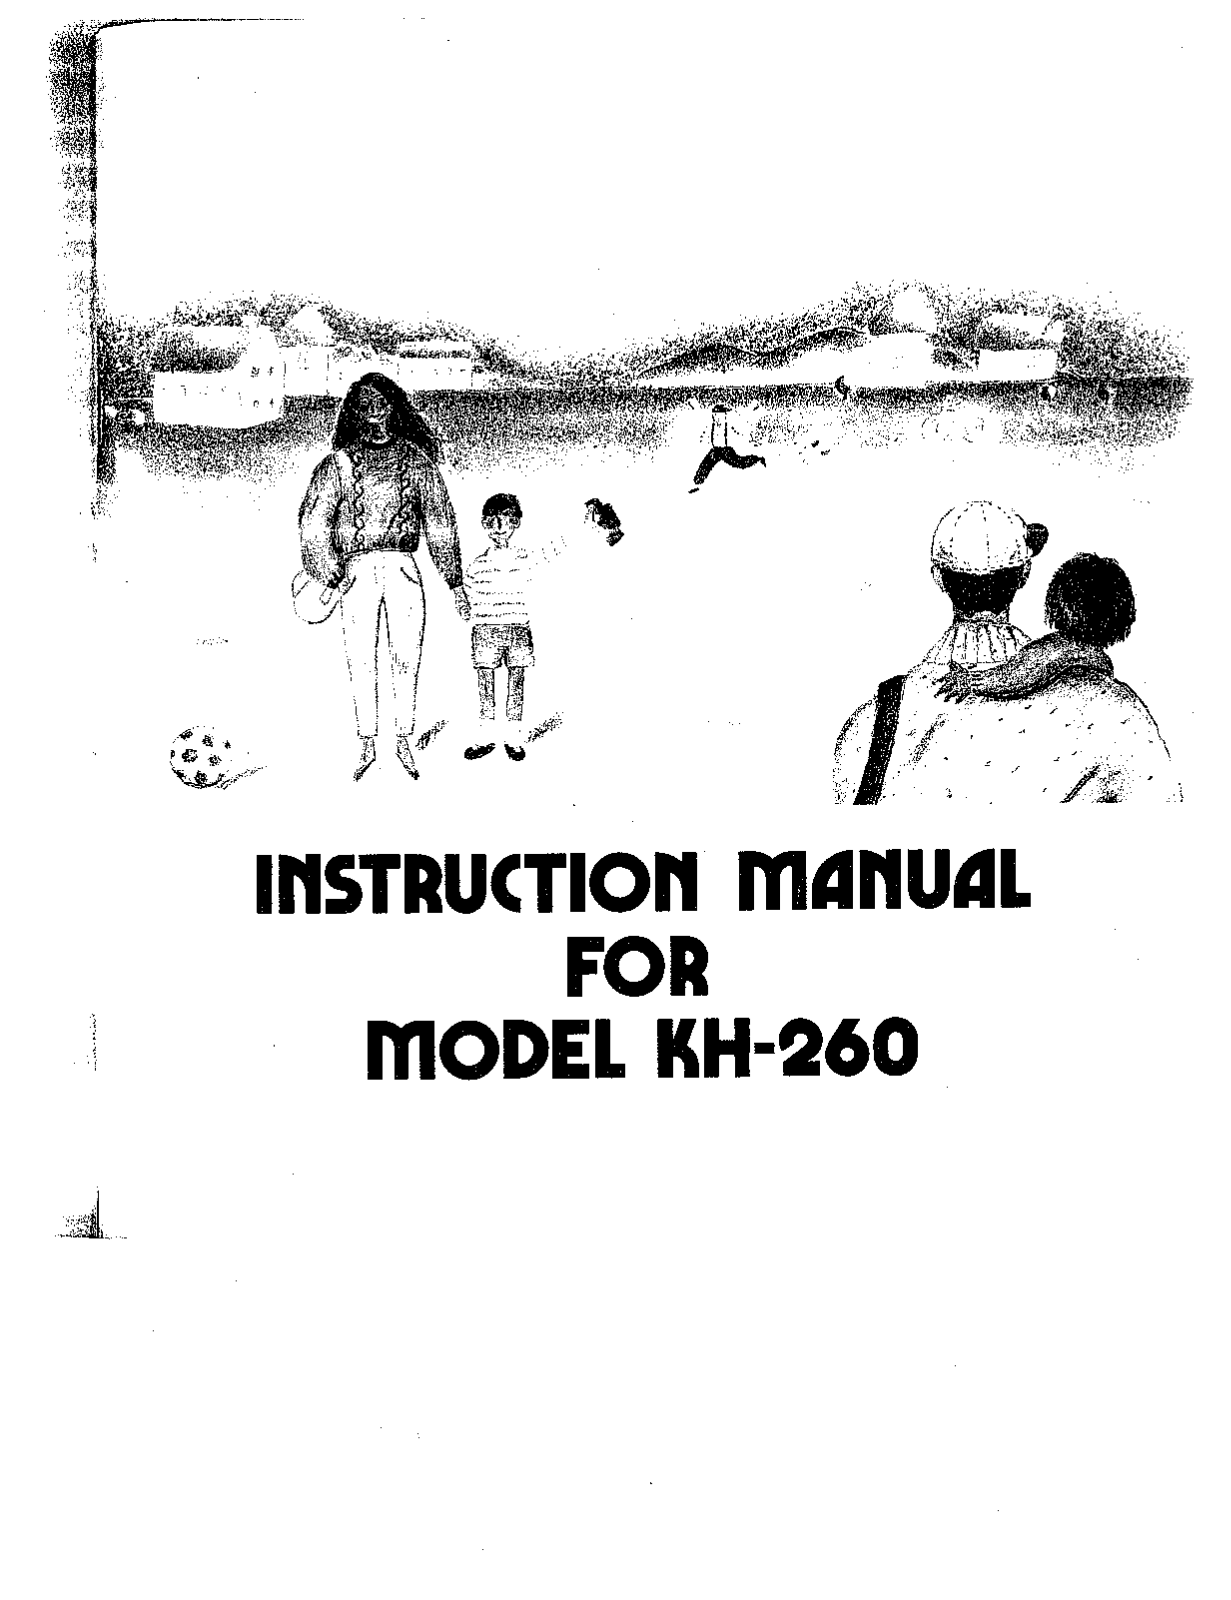 Brother KH-260 Owner's Manual